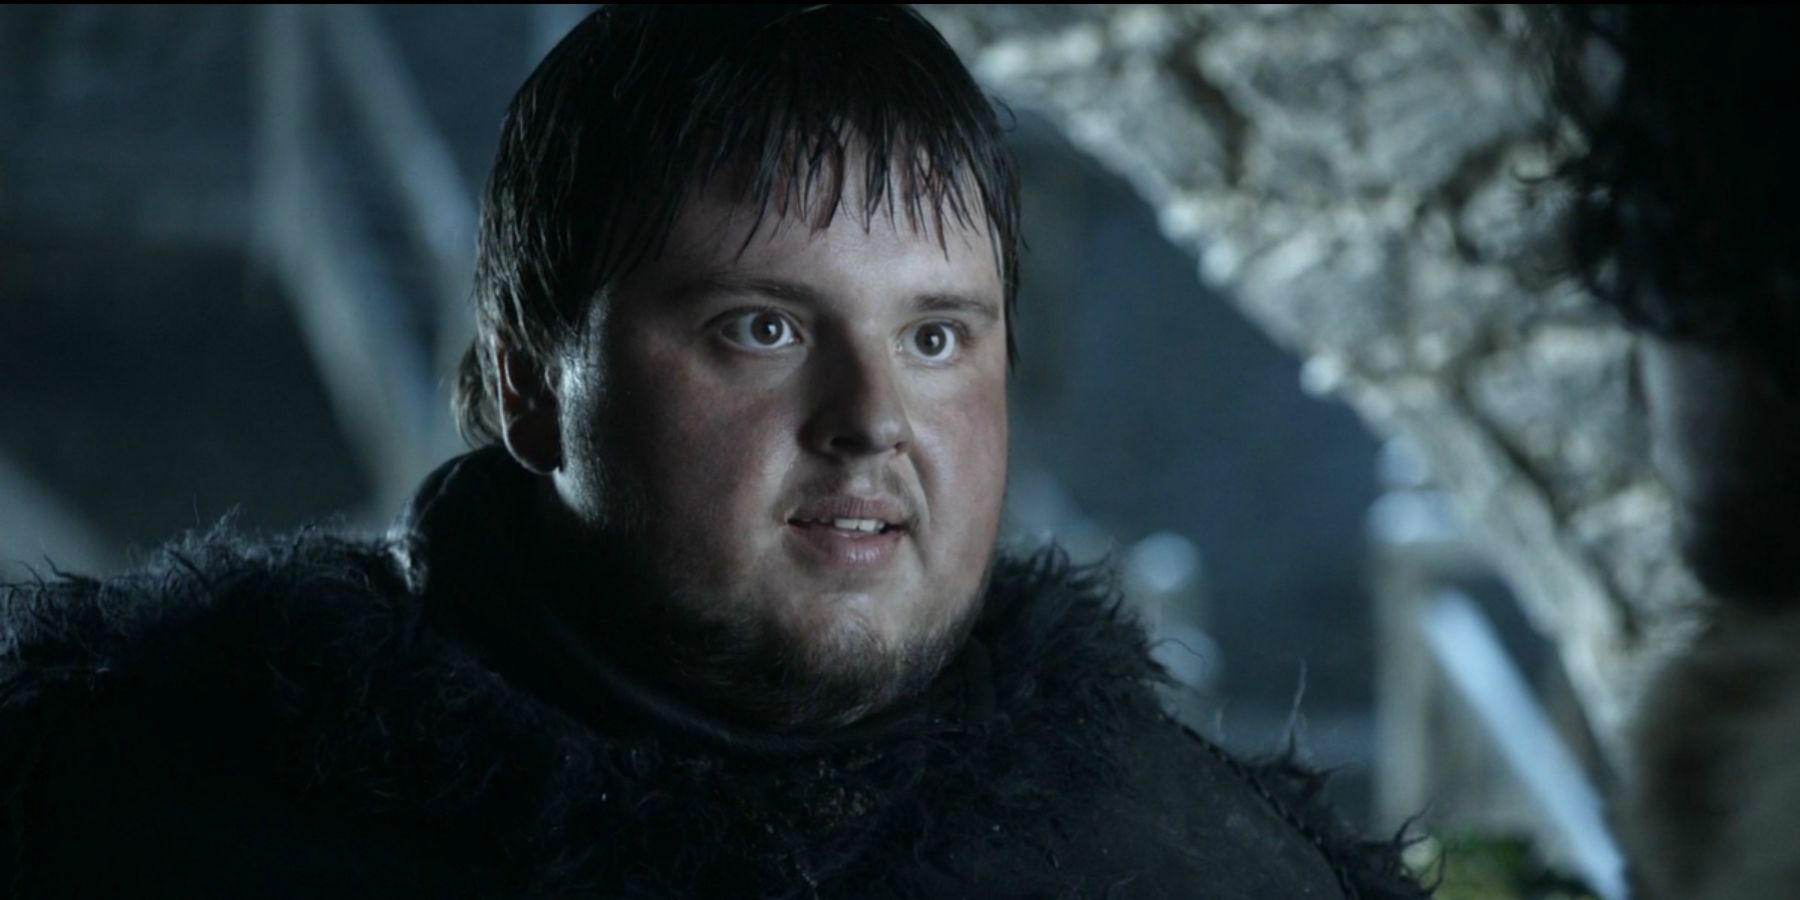 Samwell Tarly from Game of Thrones